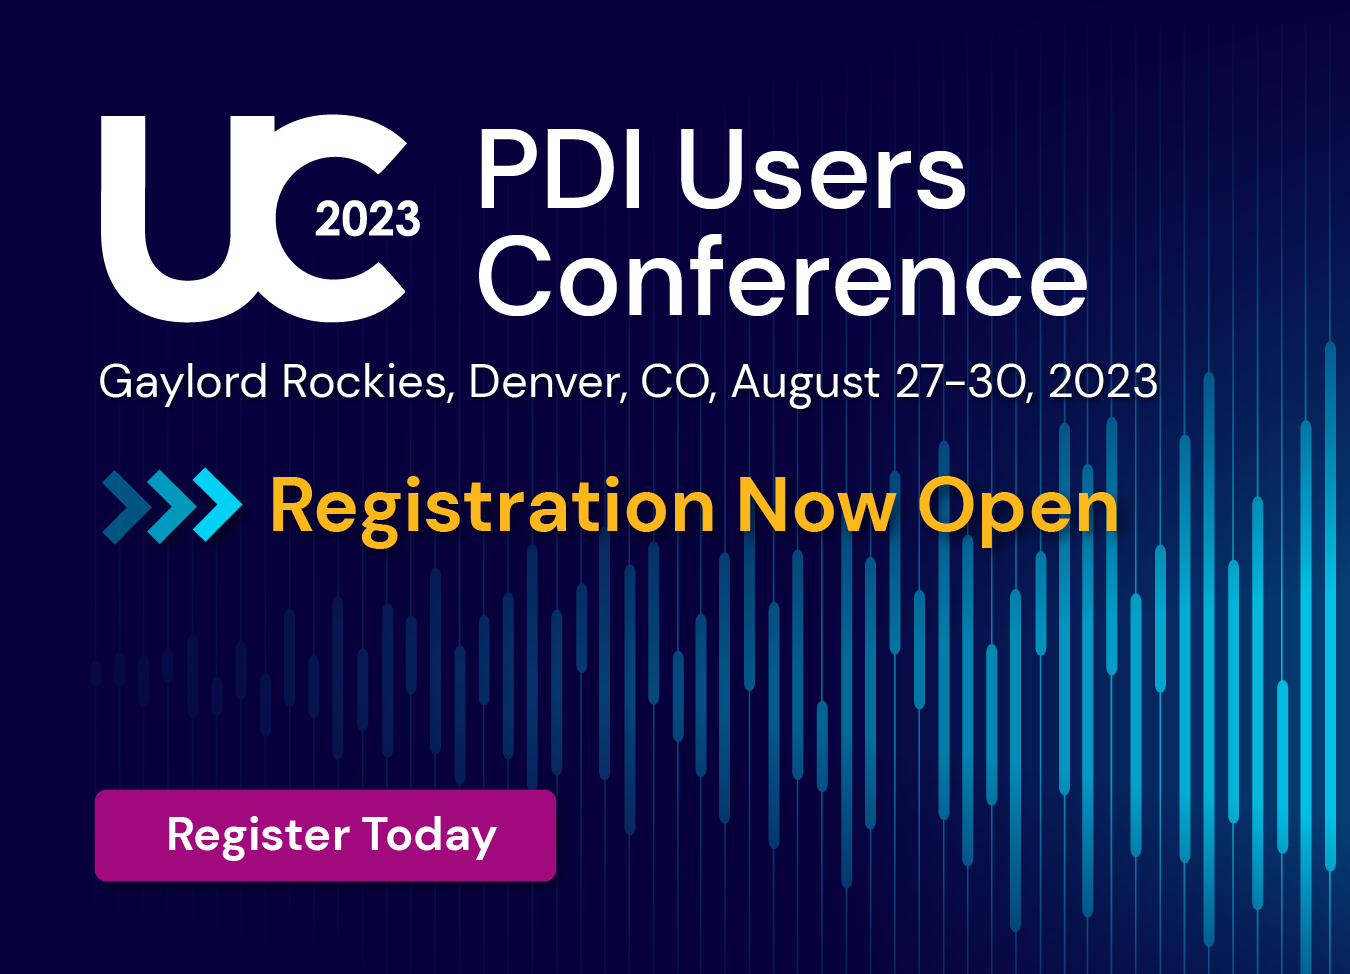 PDI Users Conference 2023 registration now open